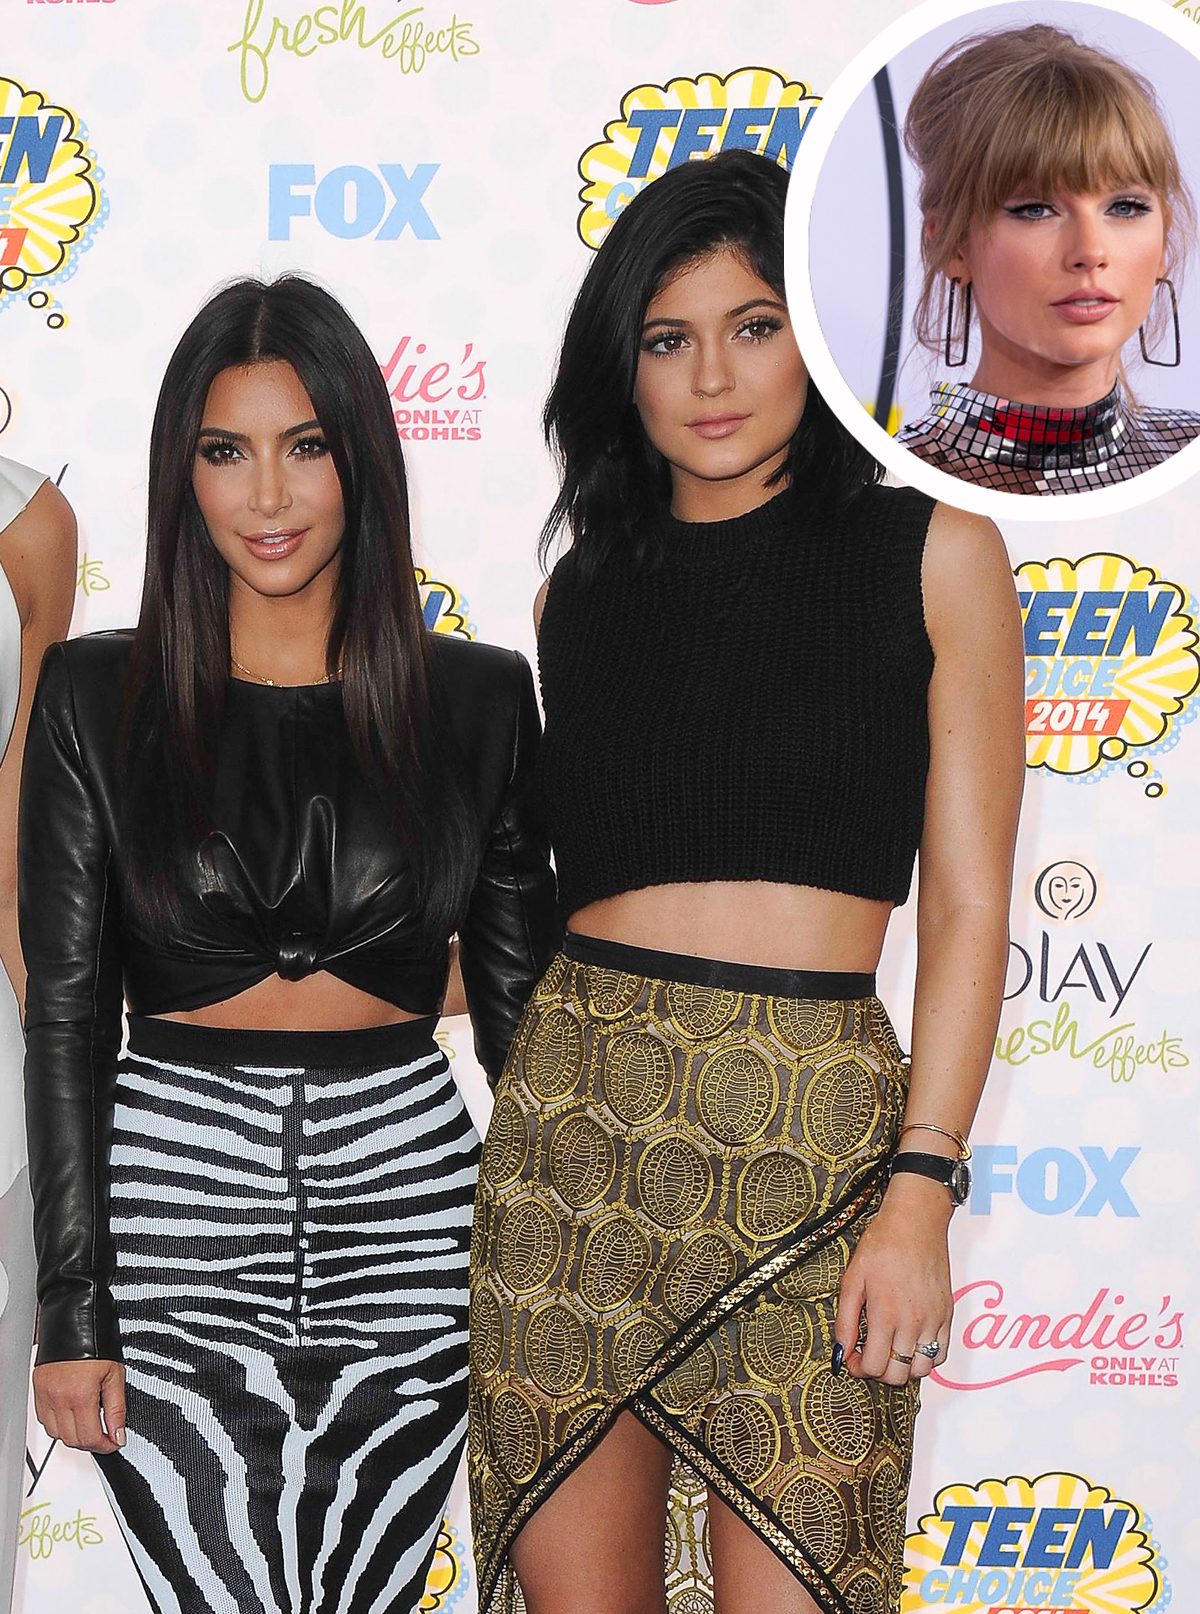 Kylie Jenner Is Taking Style Notes From Kim Kardashian's Noughties